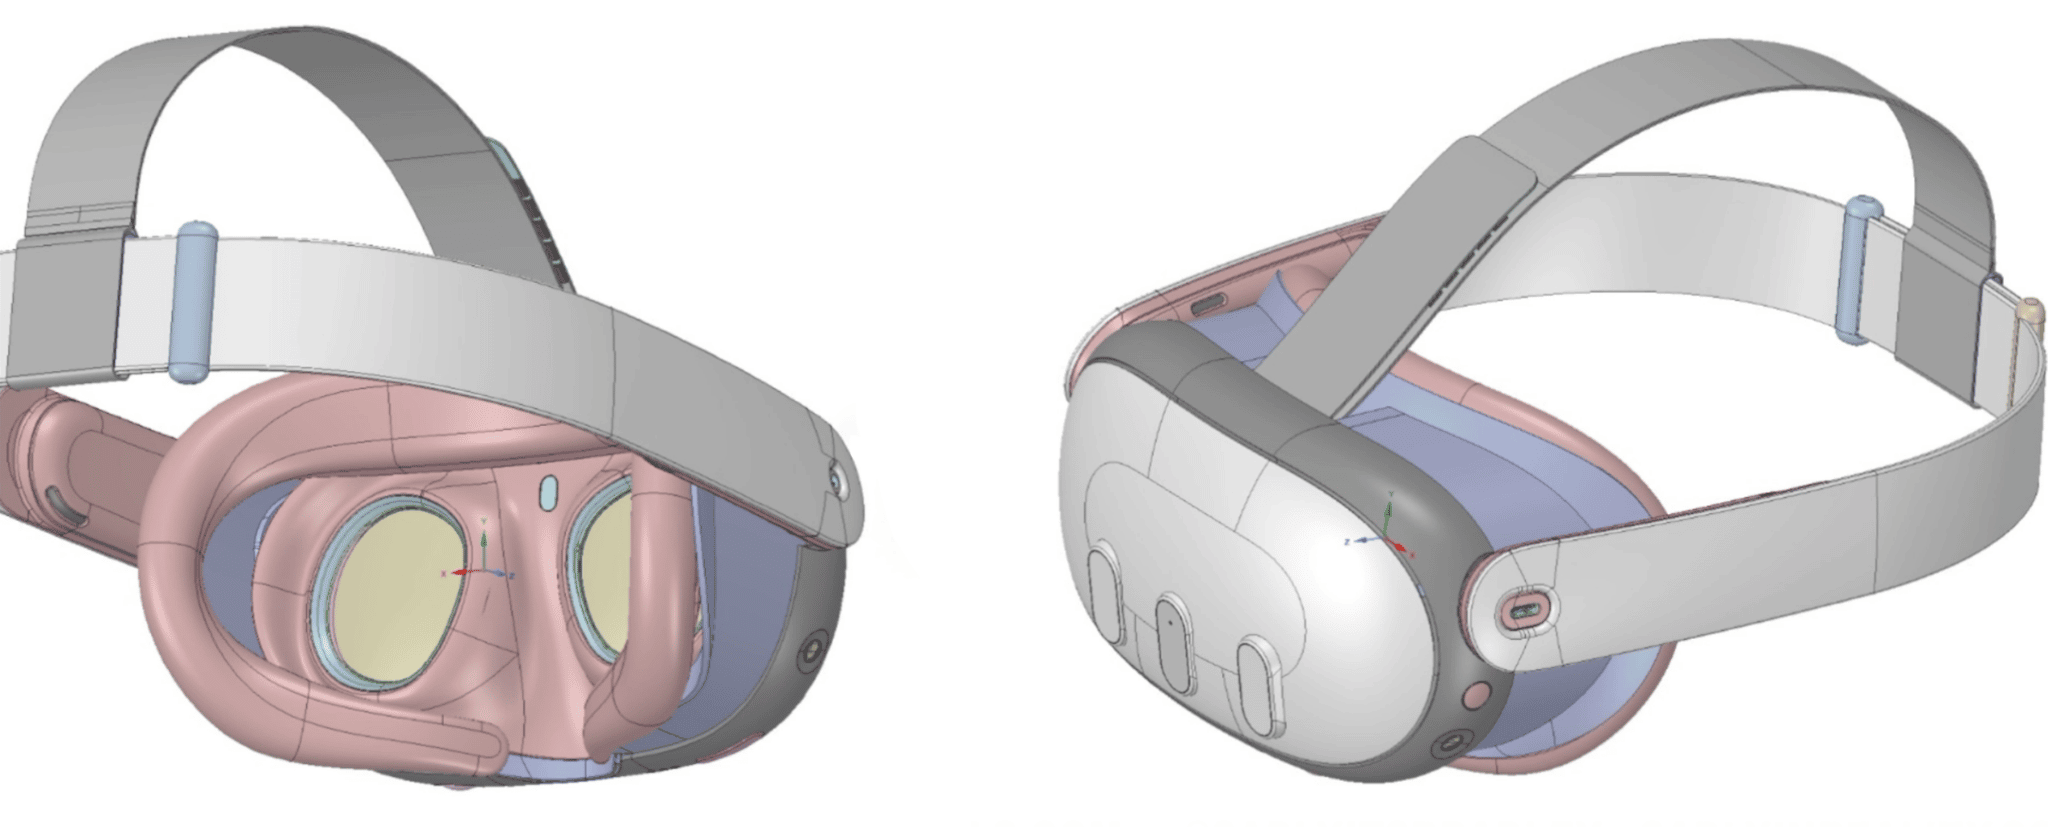 ByteDance's Pico reveals its latest VR headset as it aims to compete with  Meta Quest 2